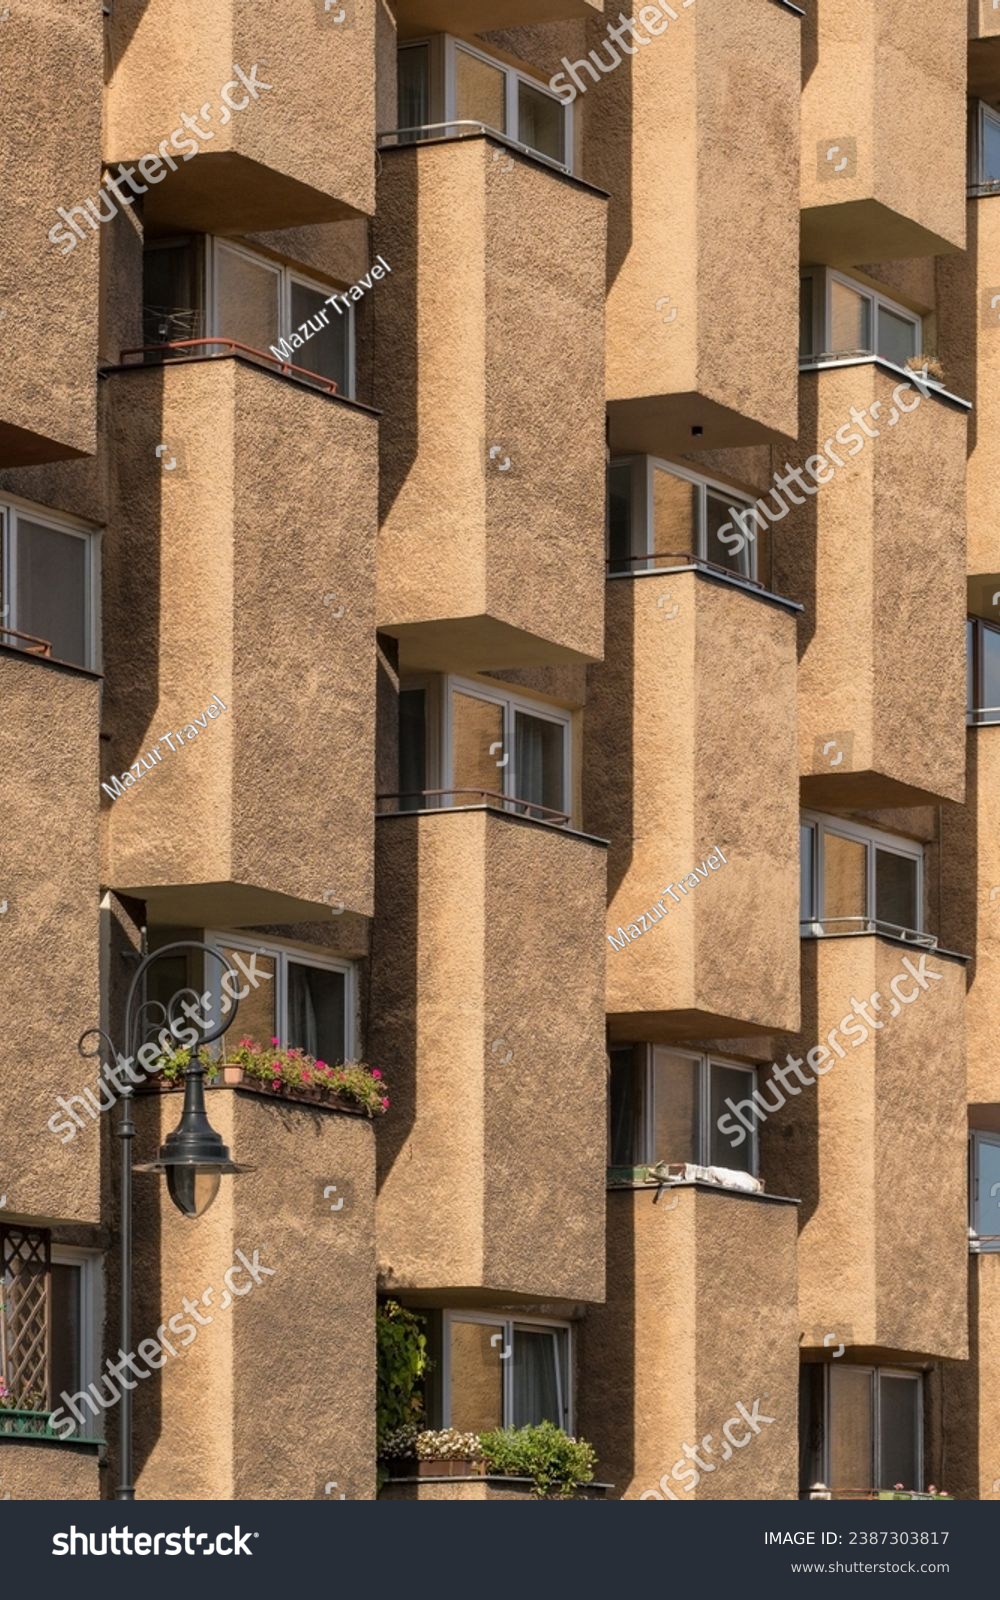 Modern architecture in the style of brutalism. Fragment of a concrete building with windows and balconies in Warsaw, Poland. New Brutalism is a branch of postwar architectural modernism.  #2387303817